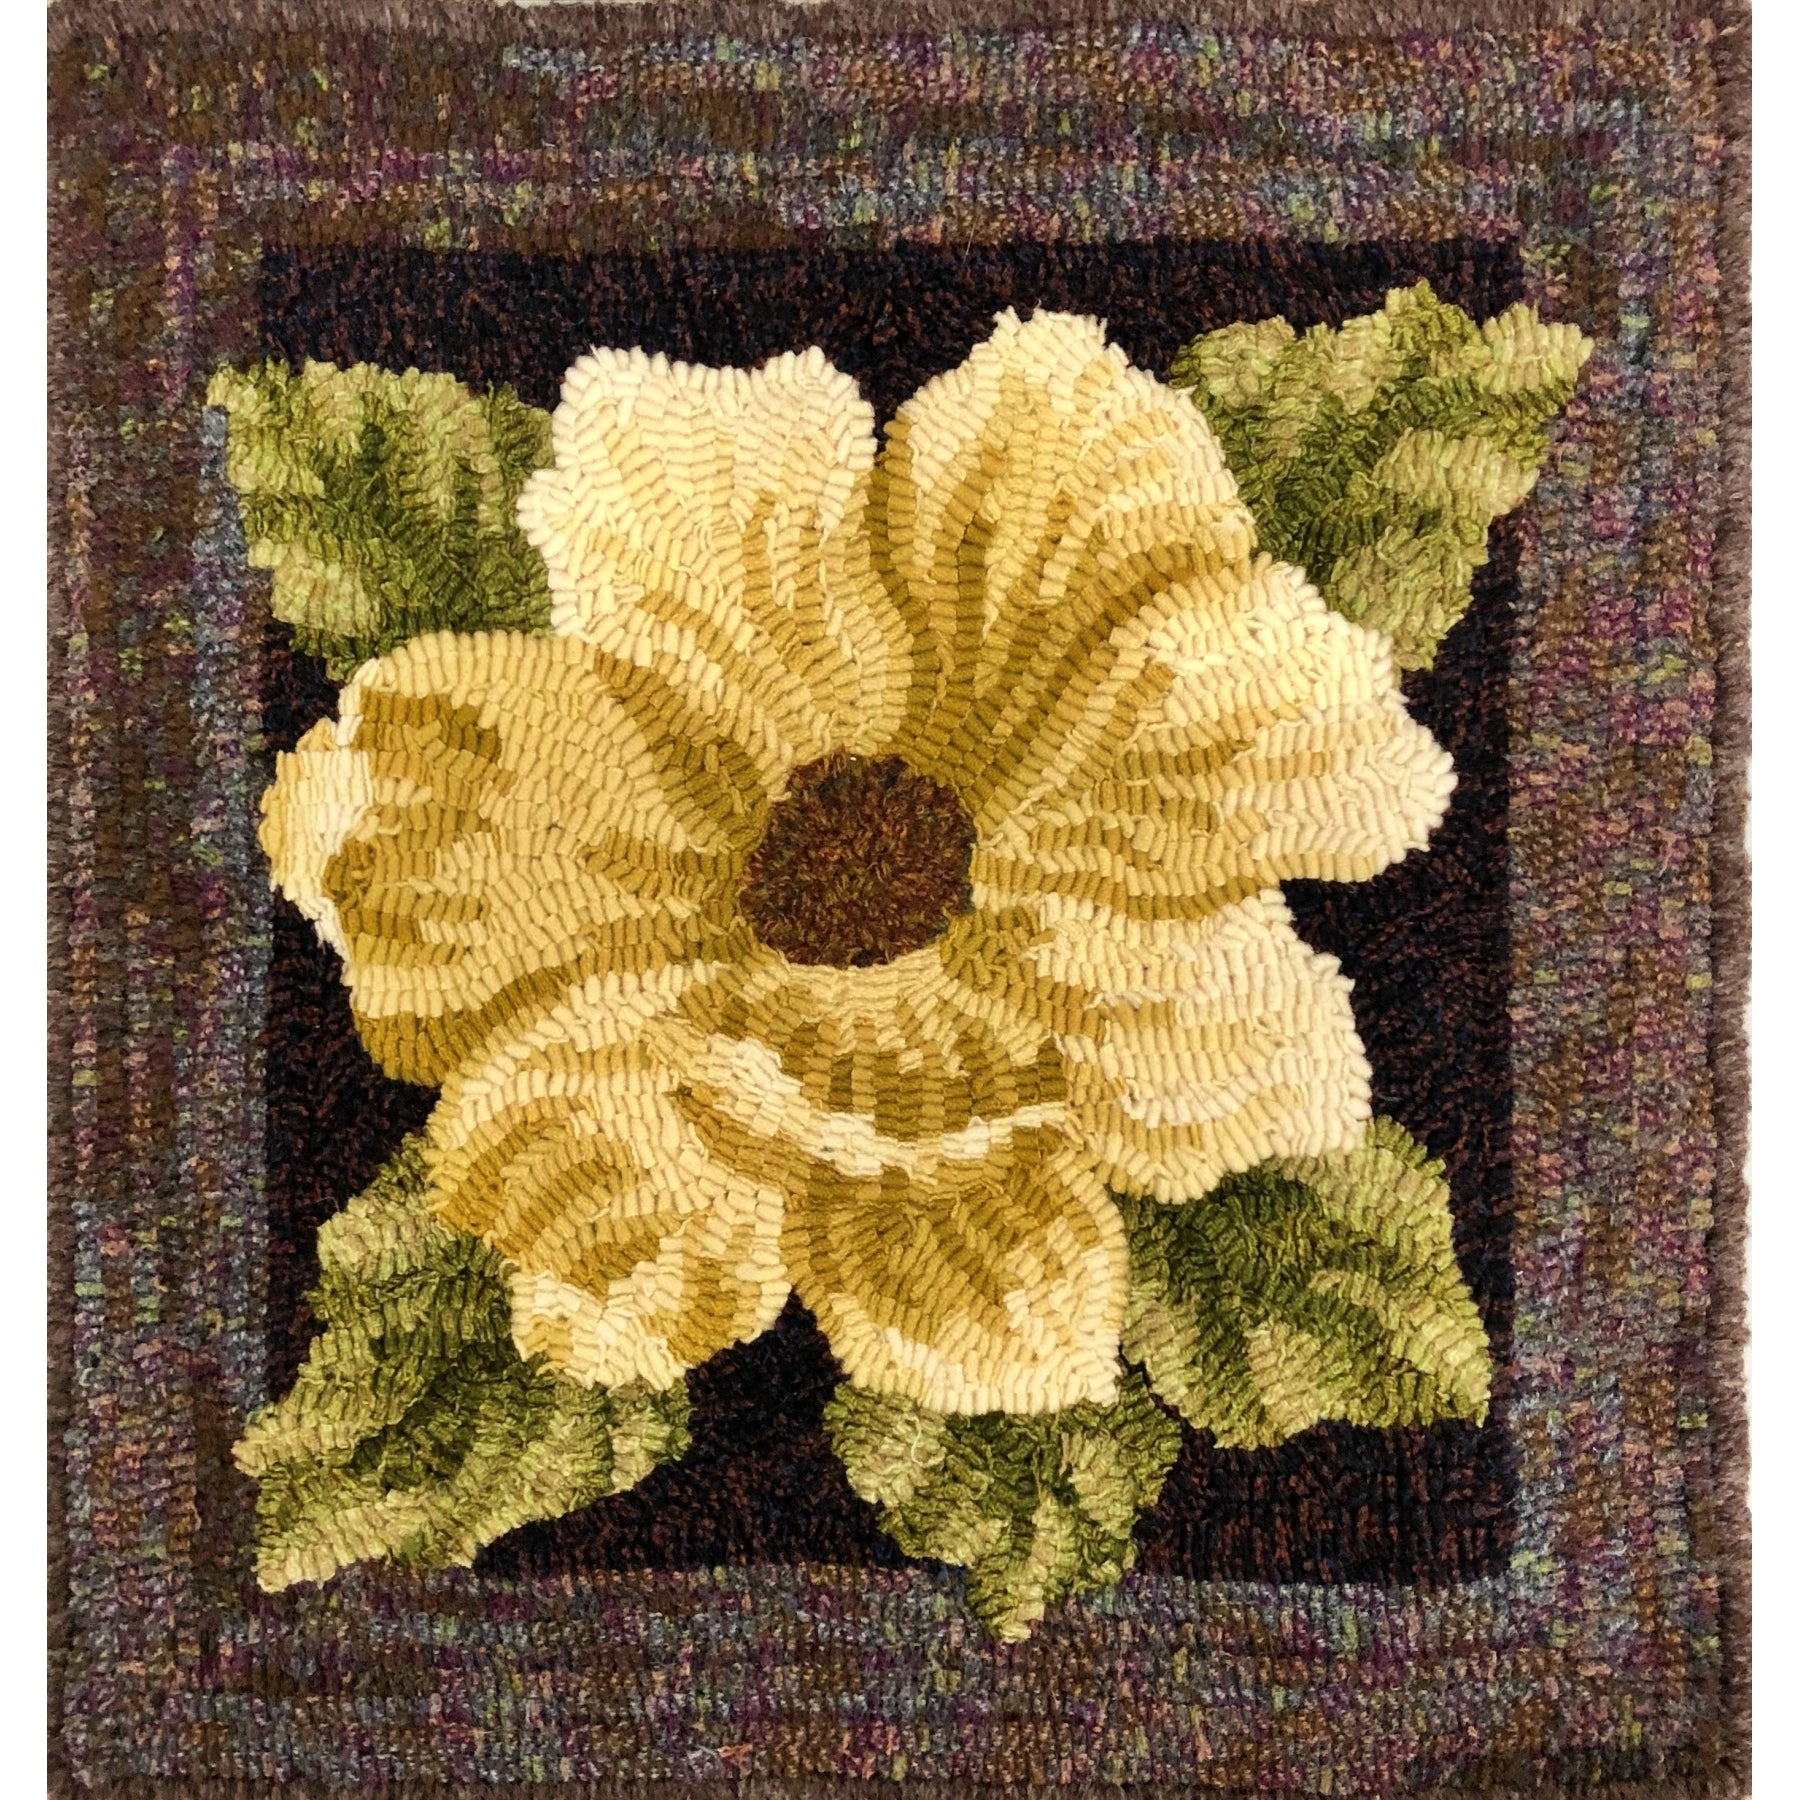 Magnolia, rug hooked by Judy Werling